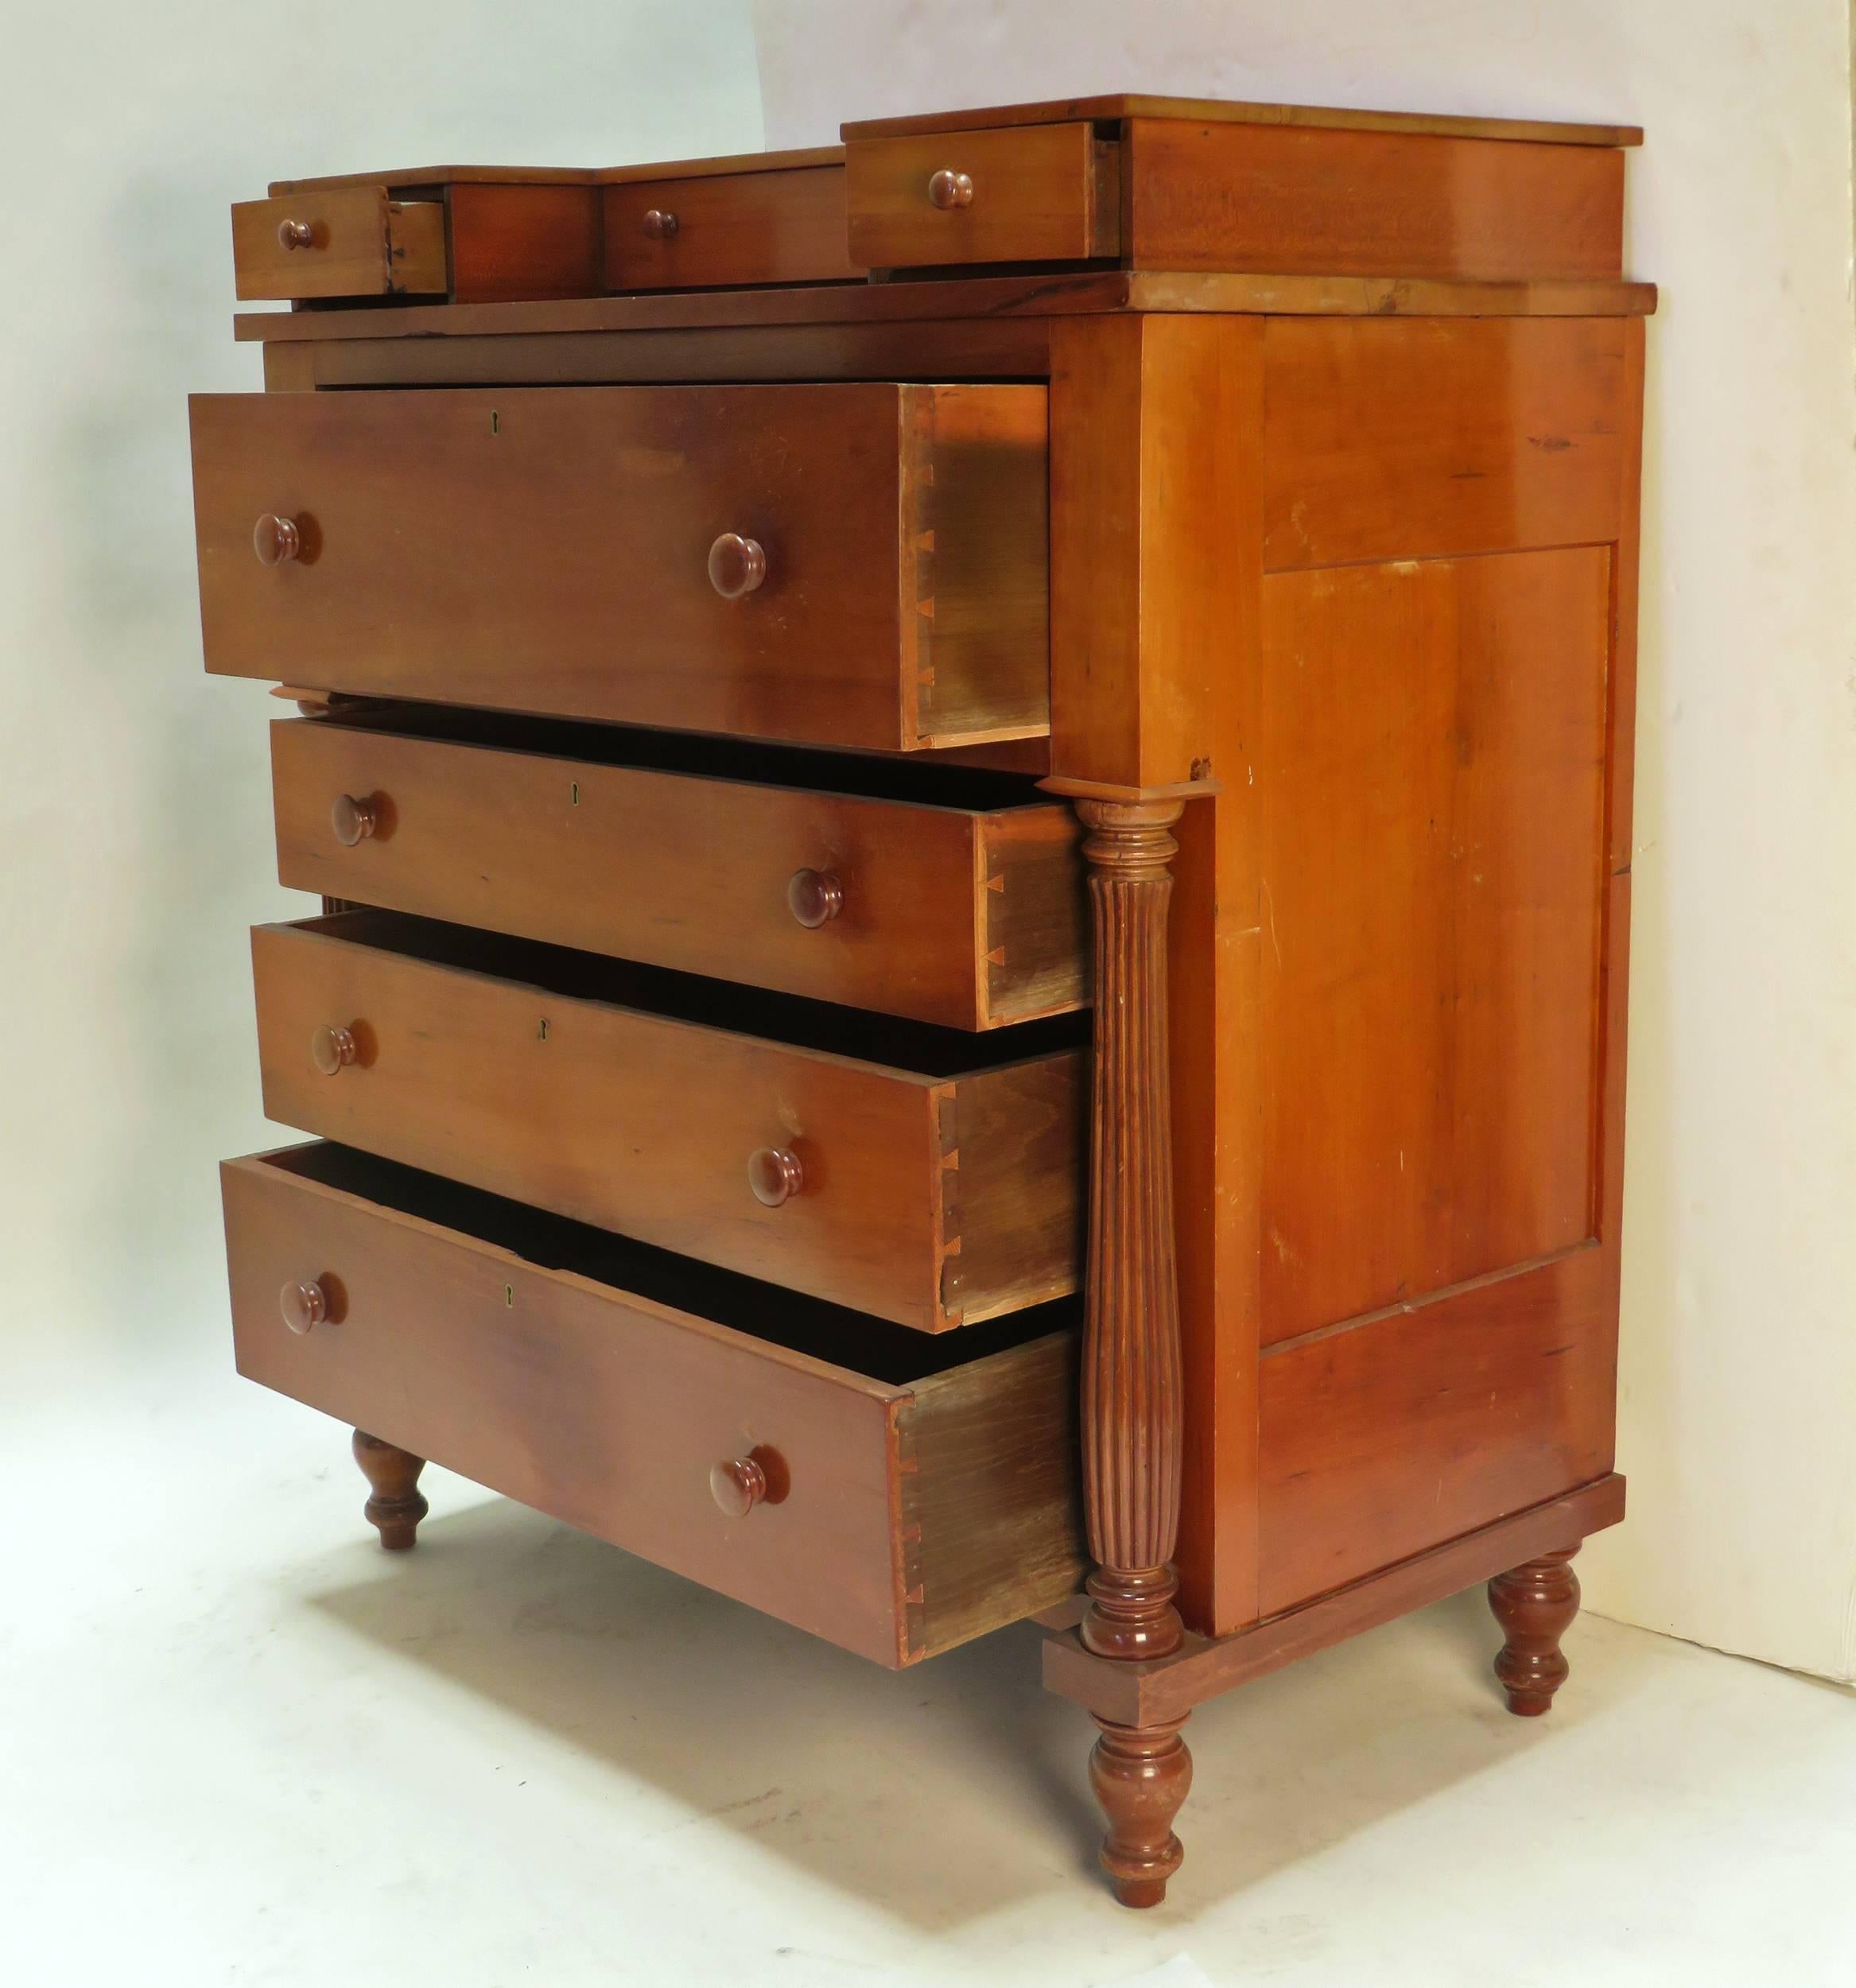 A useful and handsome American chest of drawers, circa 1840 probably in the area around Virginia. Typical turned feet support two fluted shaped columns. The small upper drawers are a nice feature.